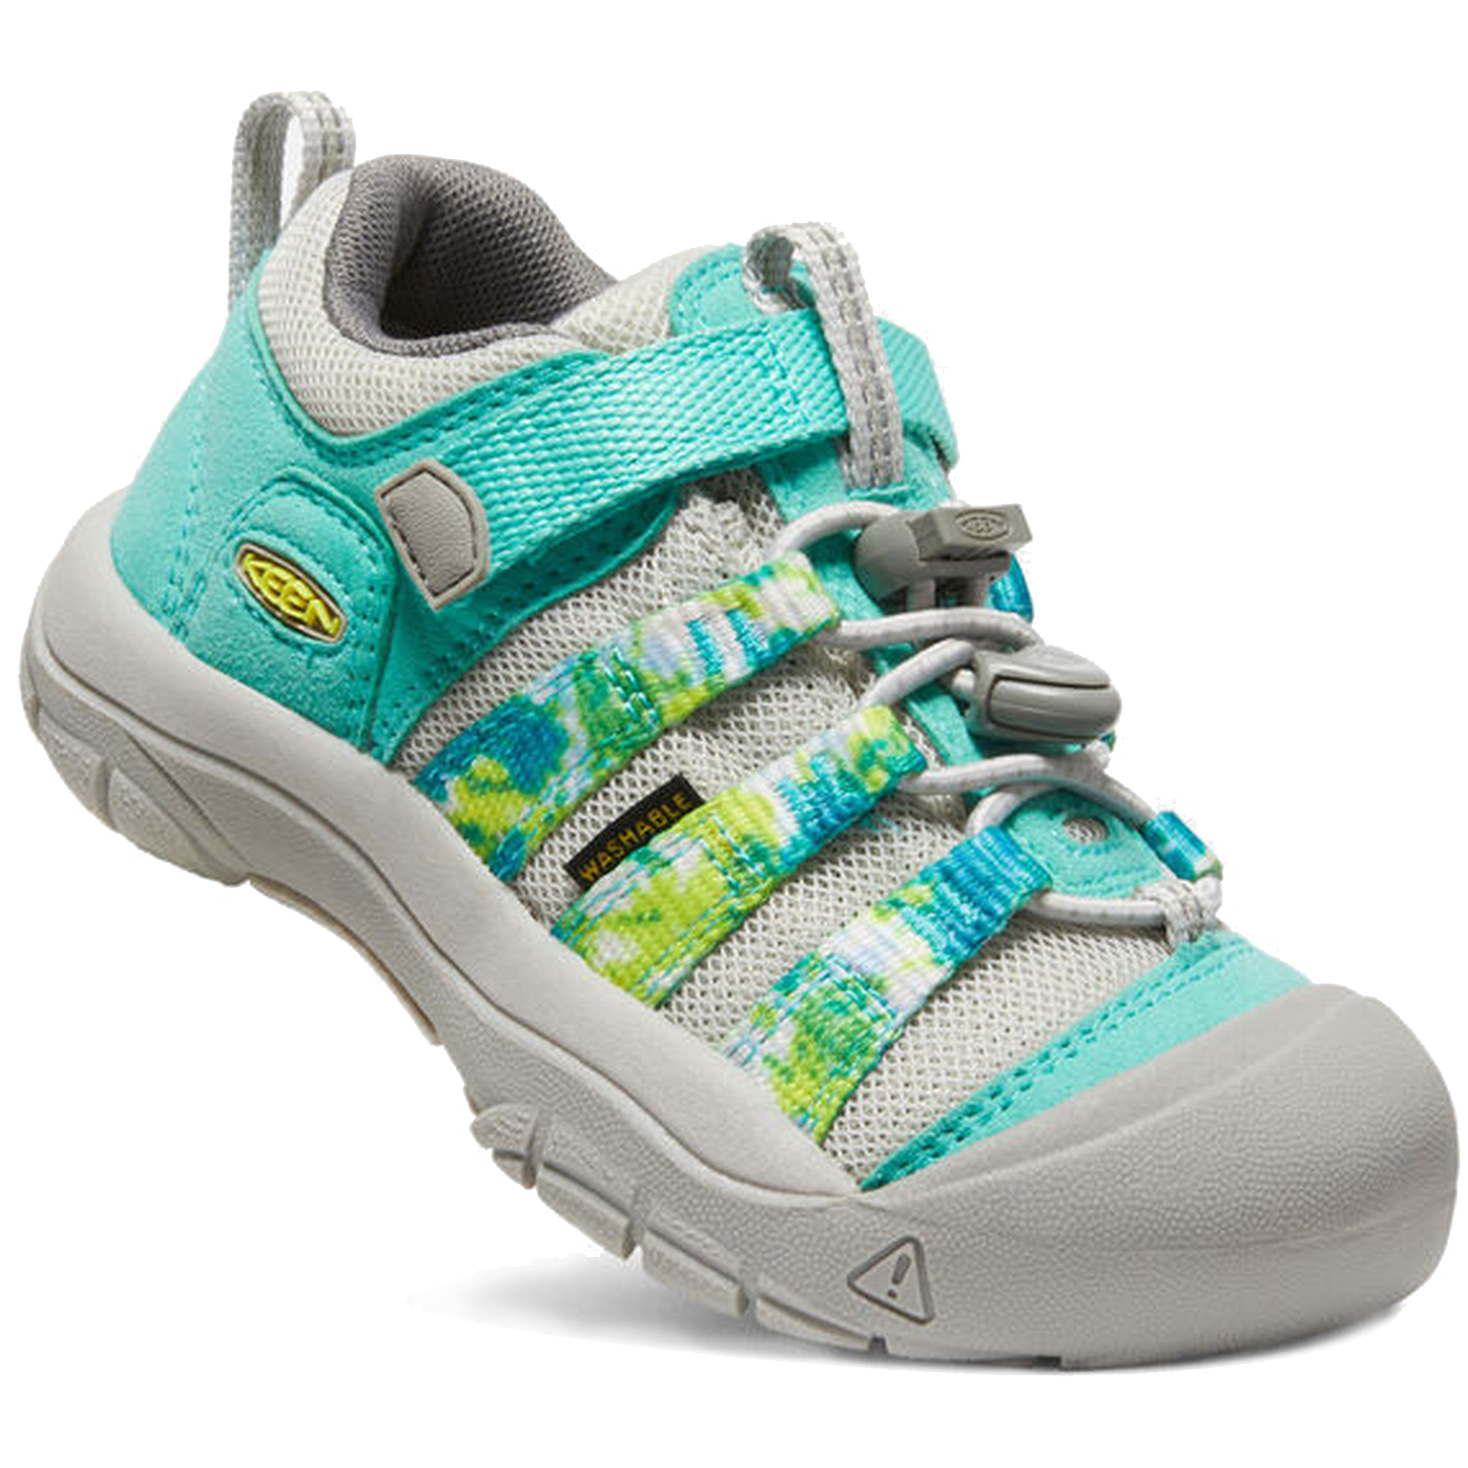 Picture of KEEN Newport H2SHO Kids Shoes - Waterfall / Evening Primrose (Size 24-31)